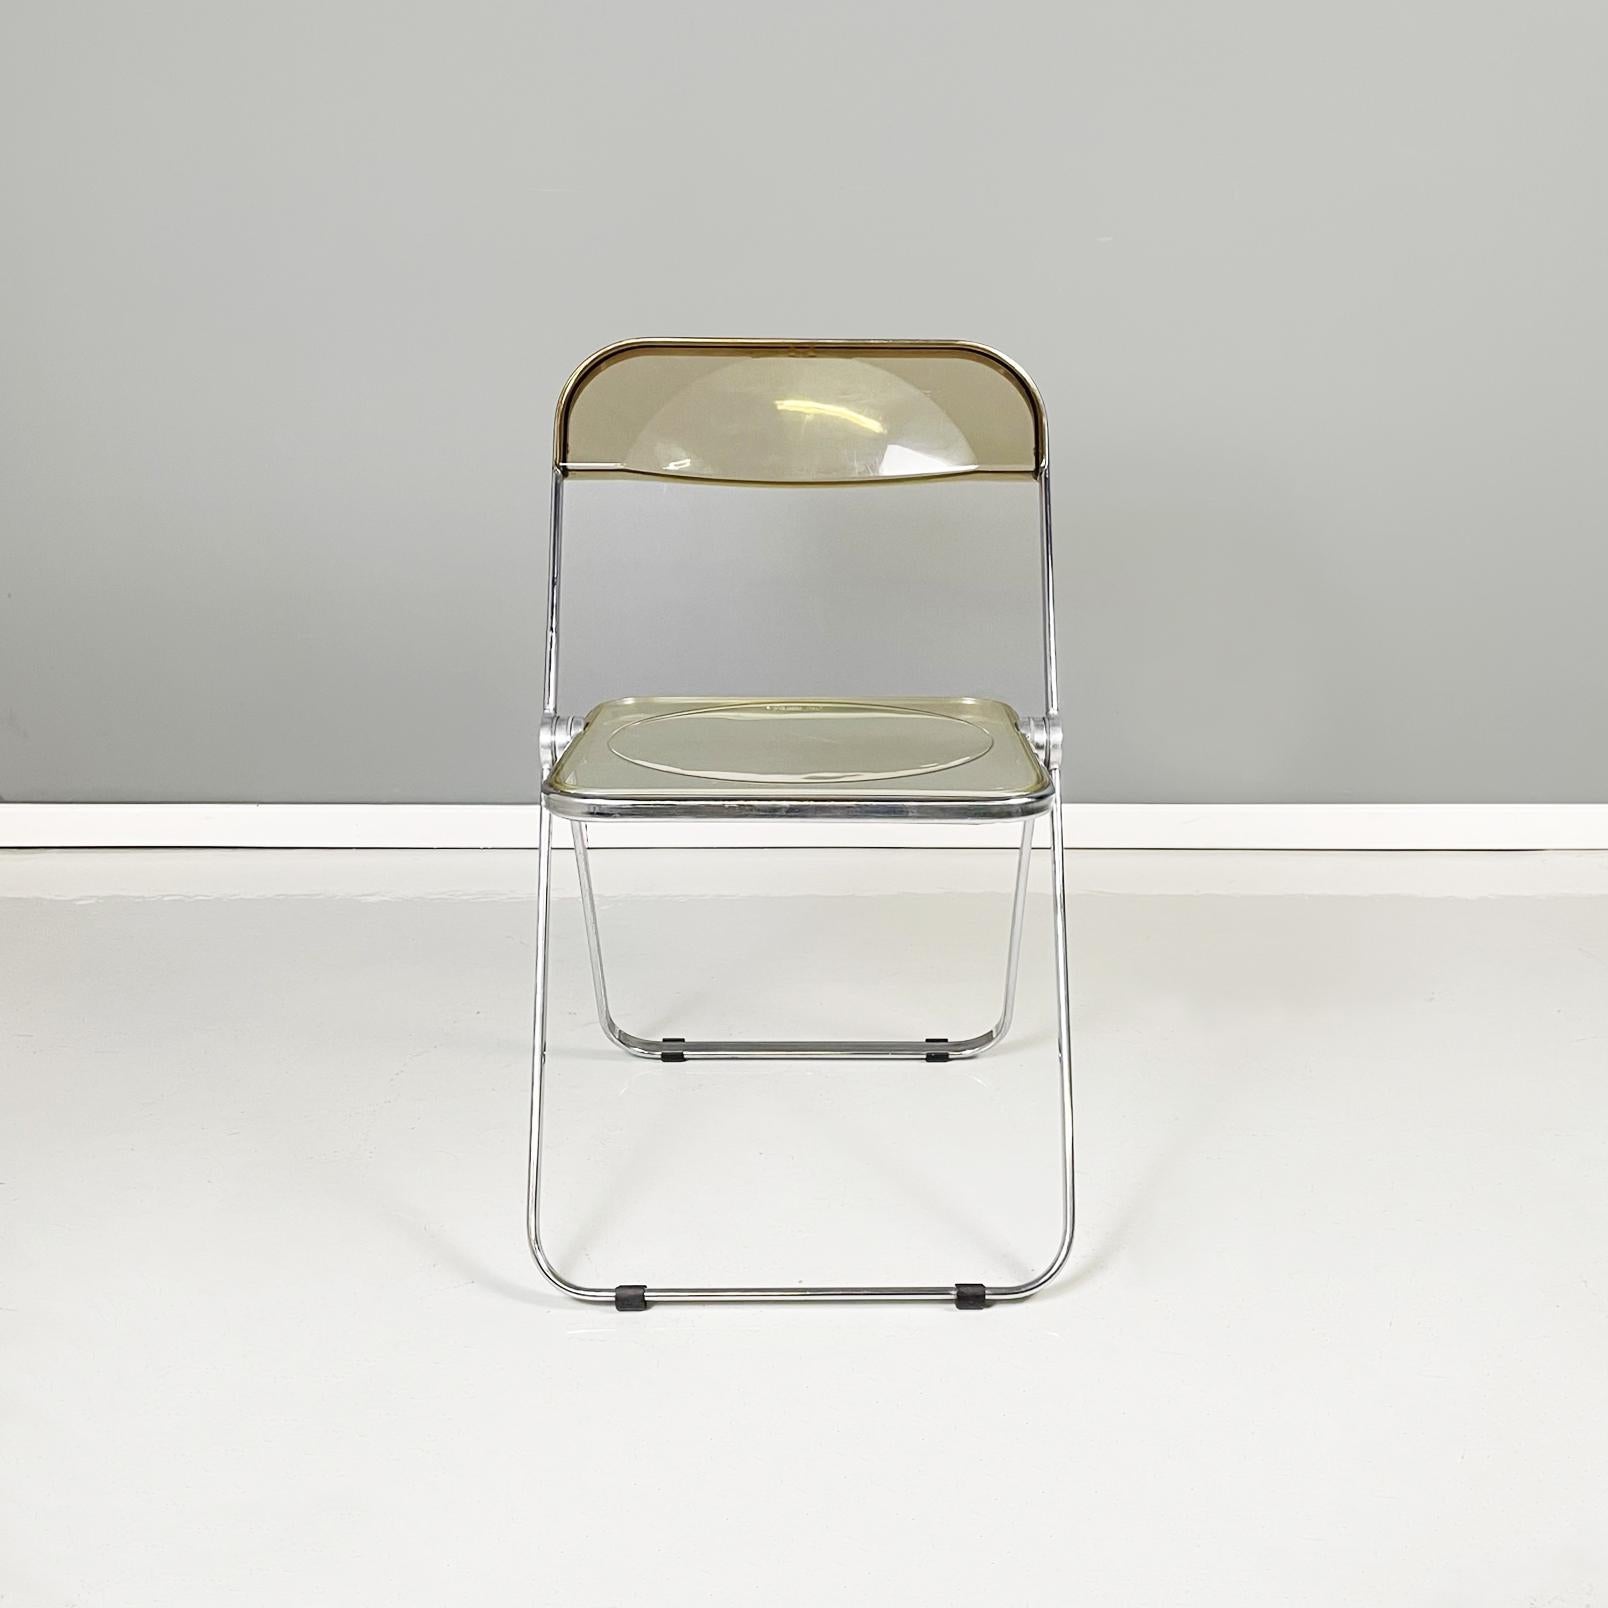 Italian modern Folding chair mod. Plia by Giancarlo Piretti for Anonima Castelli, 1970s
Iconic and fantastic folding chair mod. Plia with square seat in transparent abs and back in black-brown smoked abs. The structure is in steel.
It is produced by